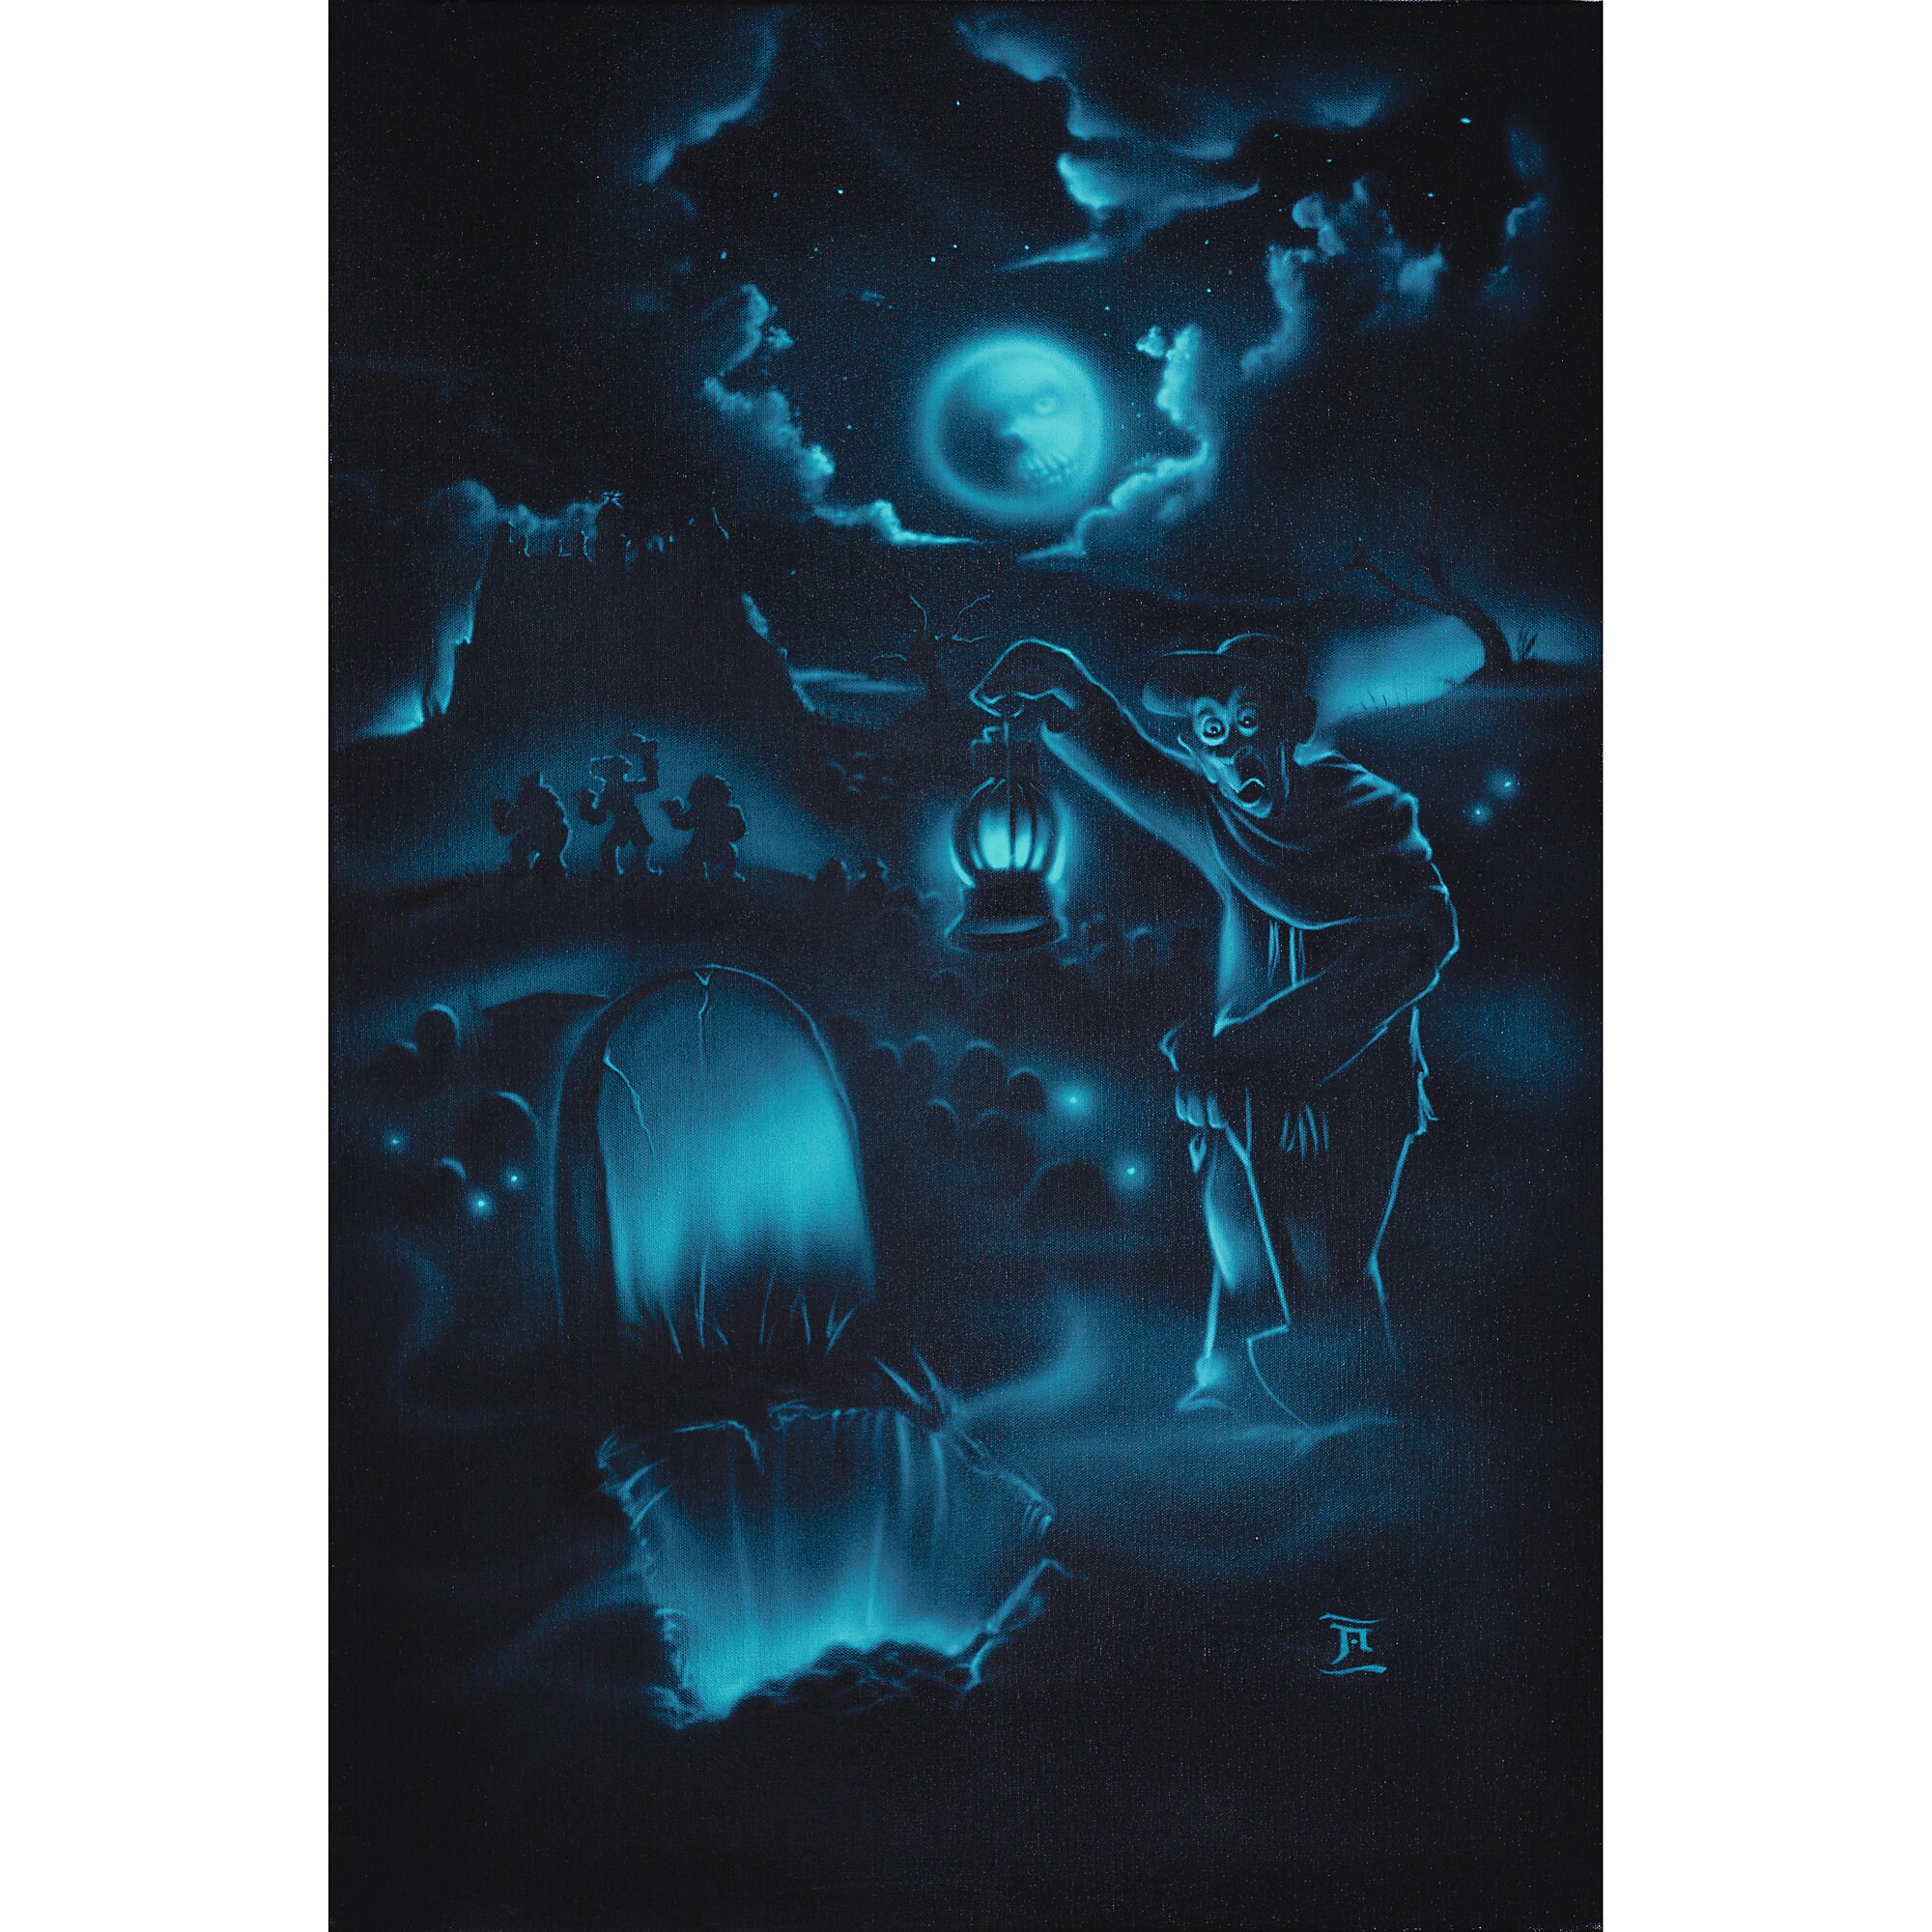 The Haunted Mansion ''Room 4 1 More'' Giclée by Noah